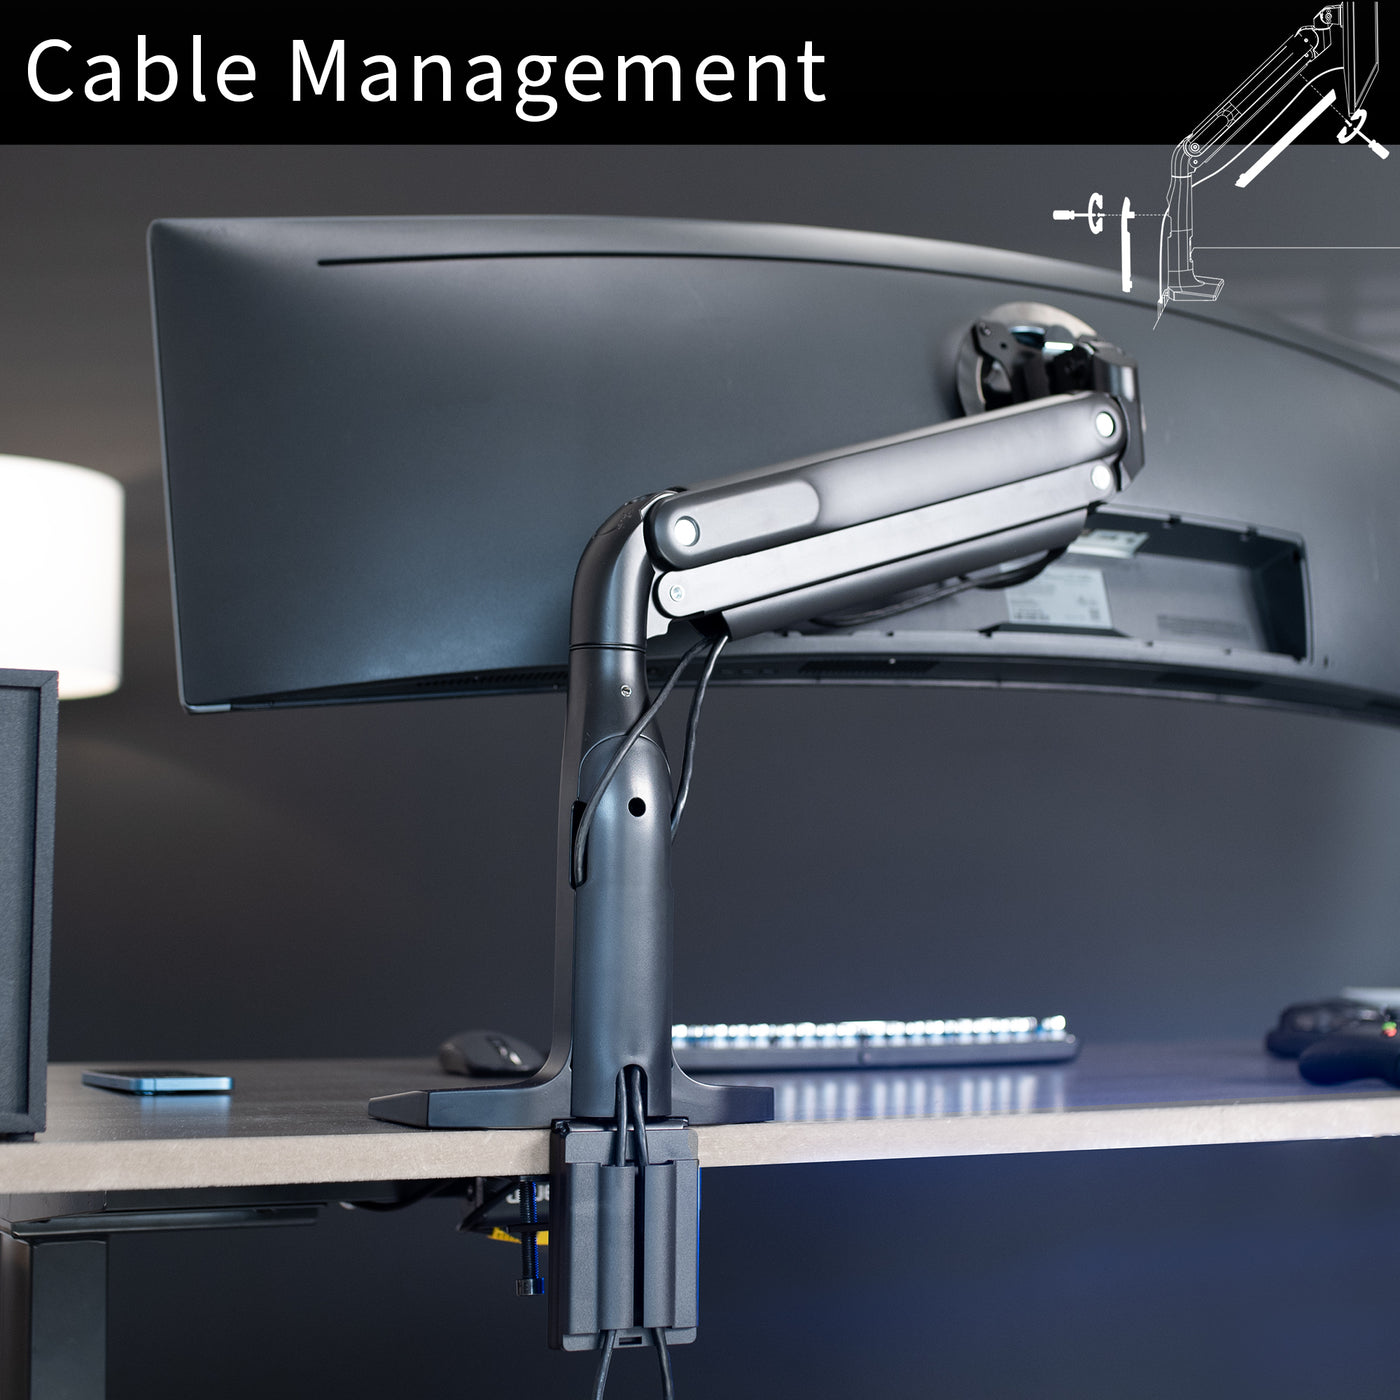 Strong pneumatic arm with incorporated cable management.